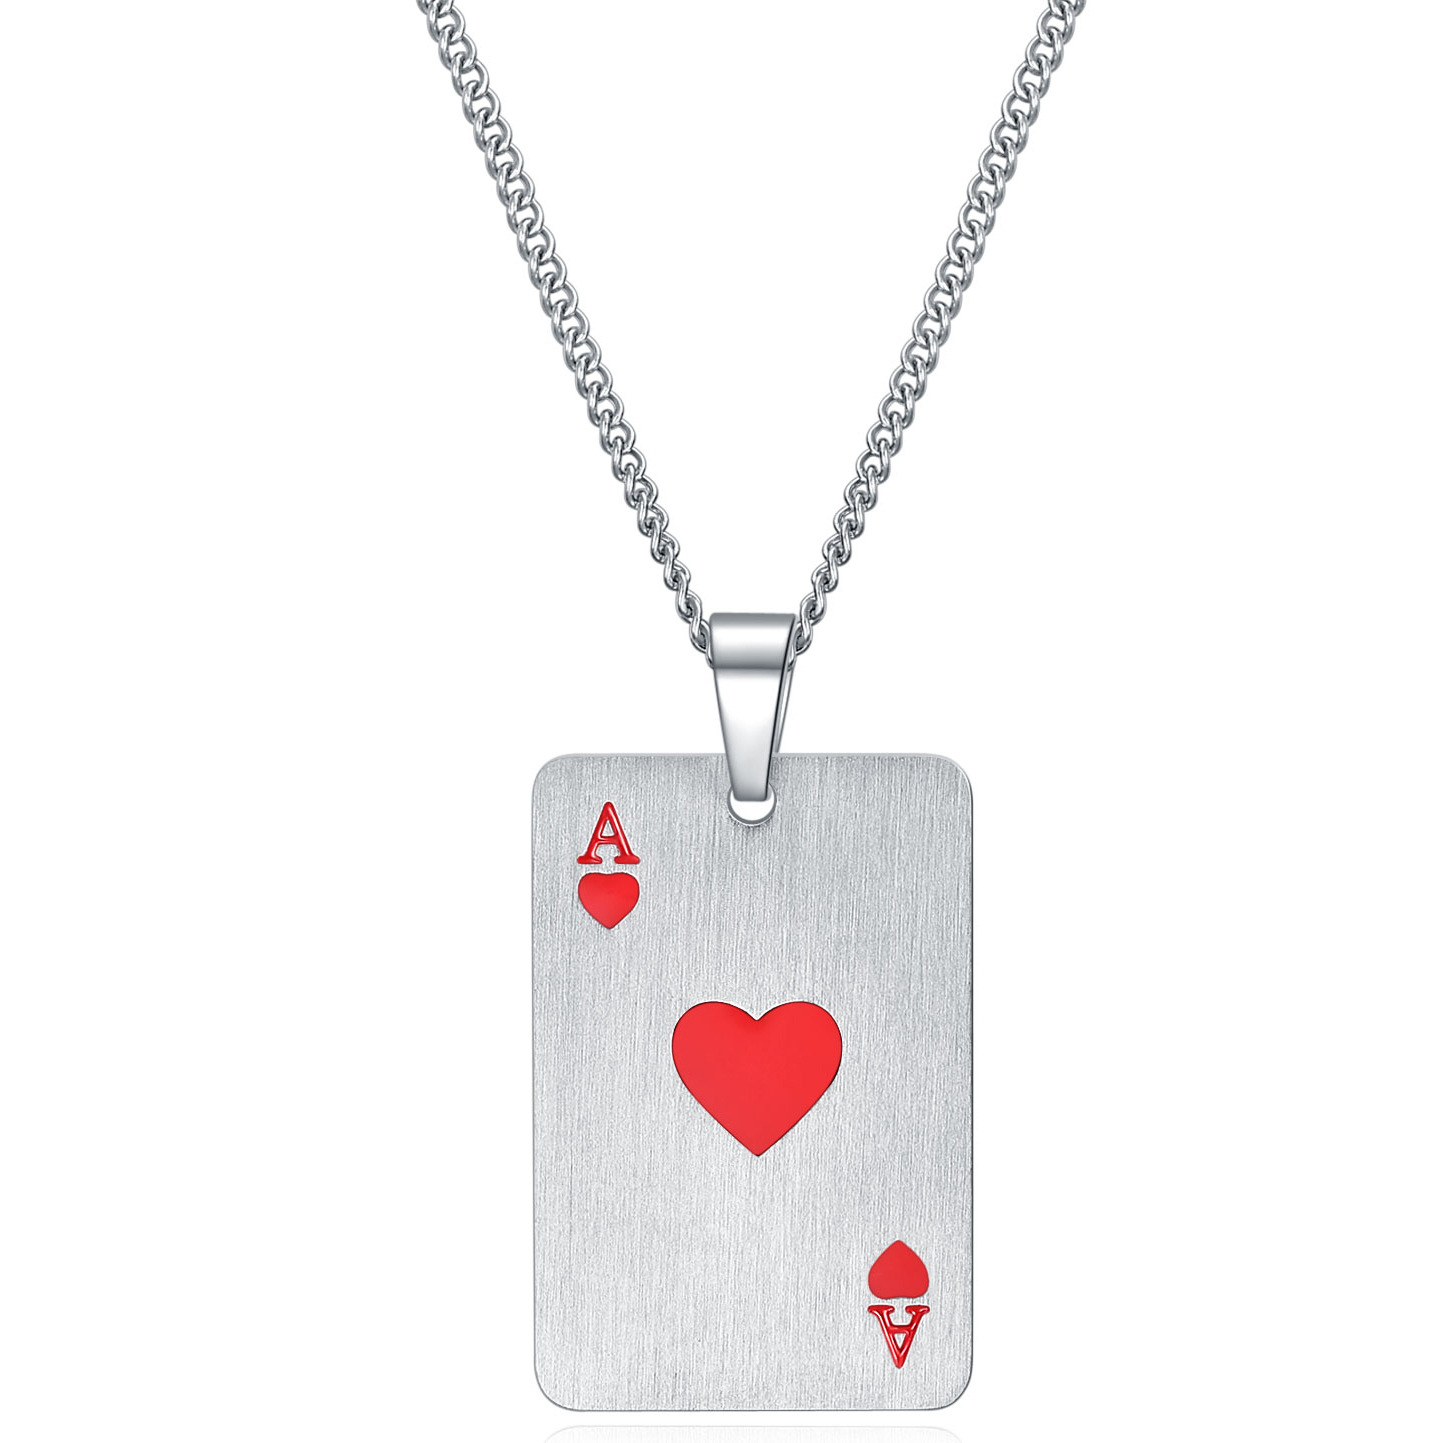 Steel ace of hearts